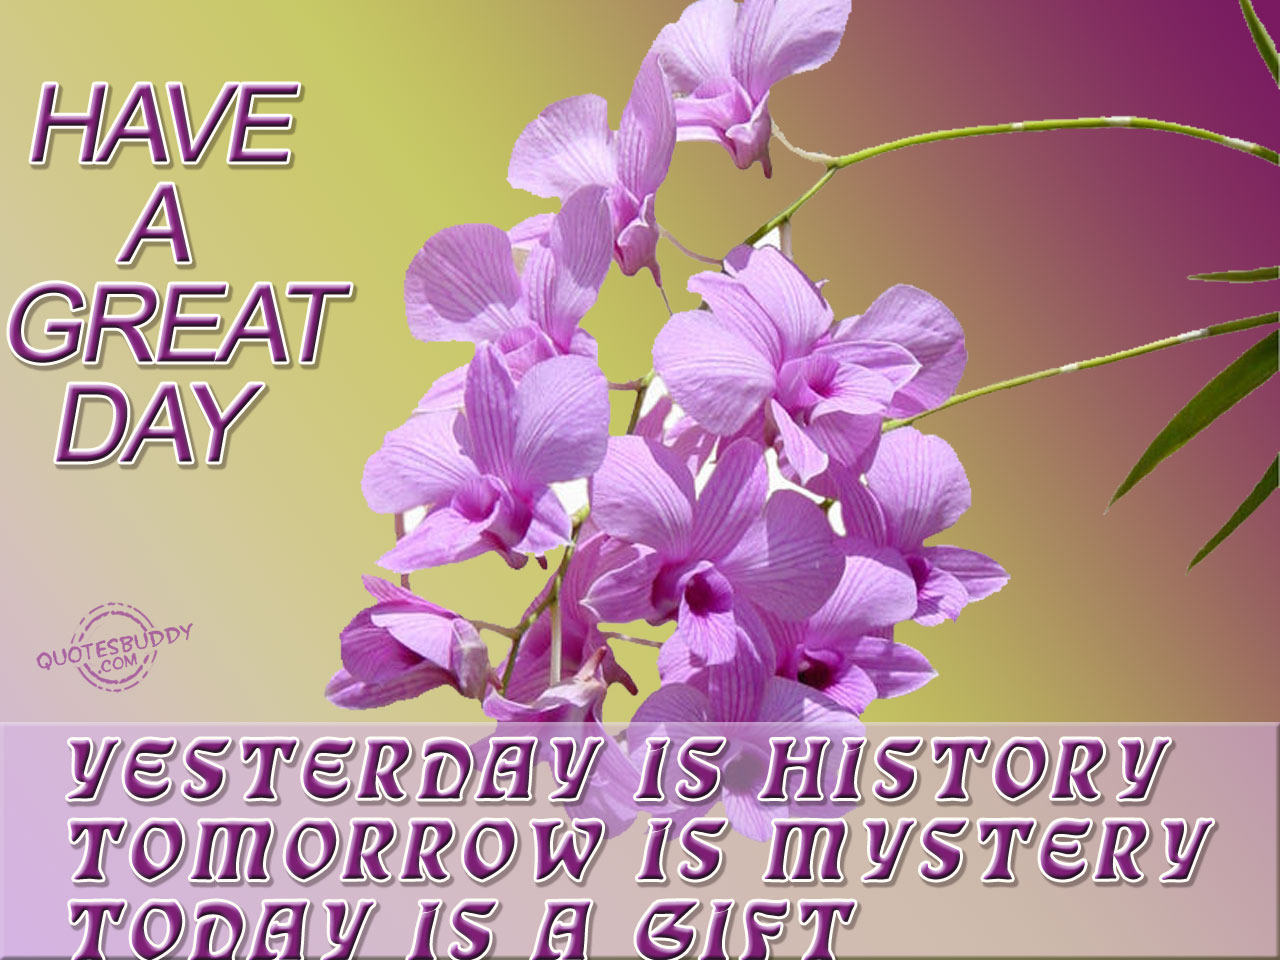 Yesterday is history, tomorrow is a mystery, today is a gift